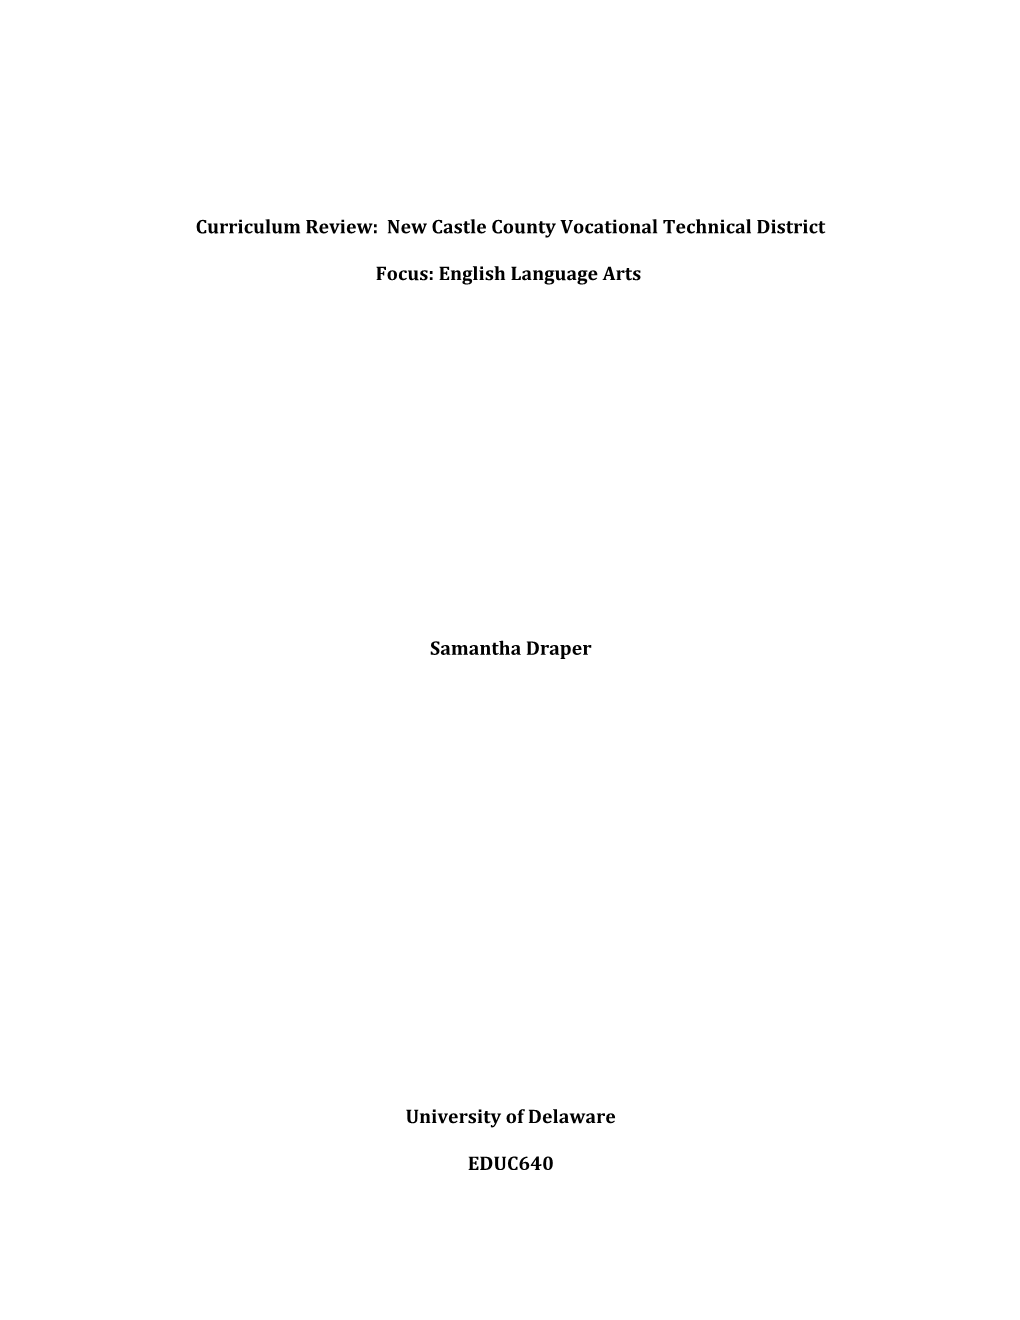 Curriculum Review: New Castle County Vocational Technical District